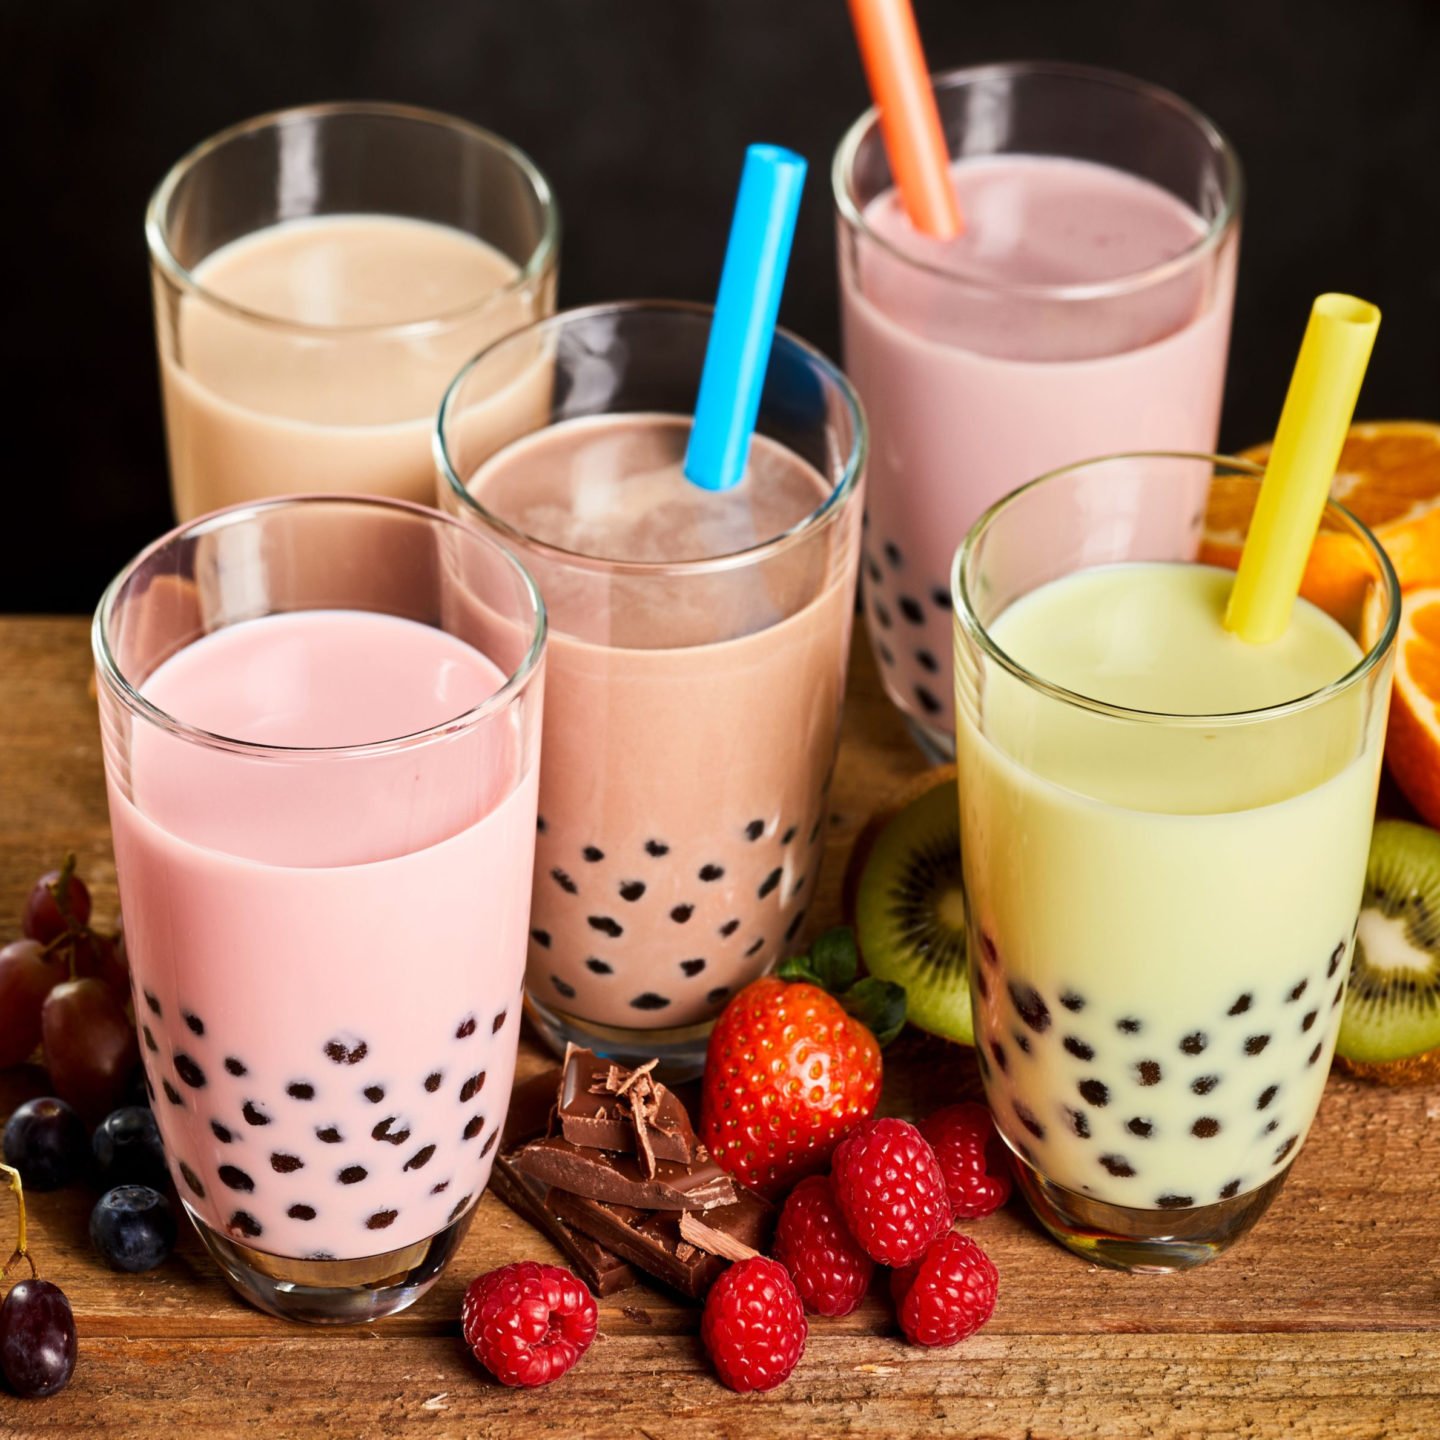 boba tea flavors in glasses with straws